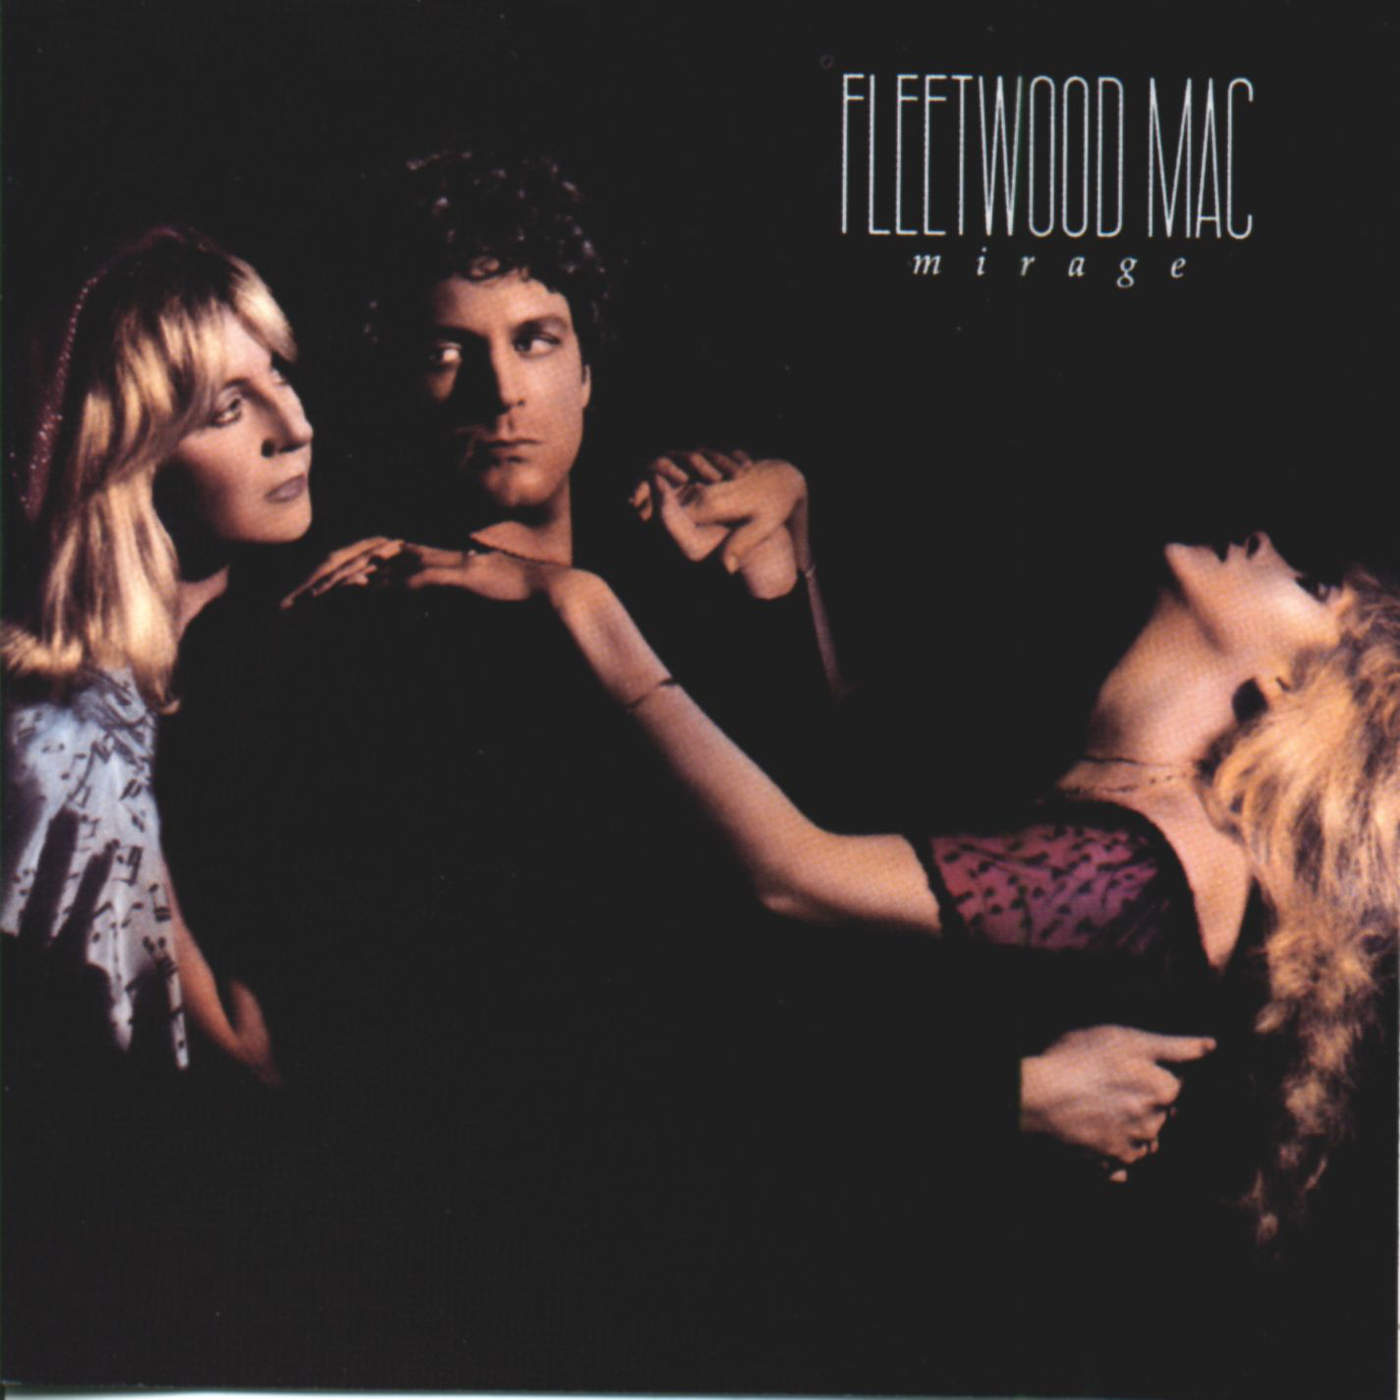 Art for Hold Me by Fleetwood Mac